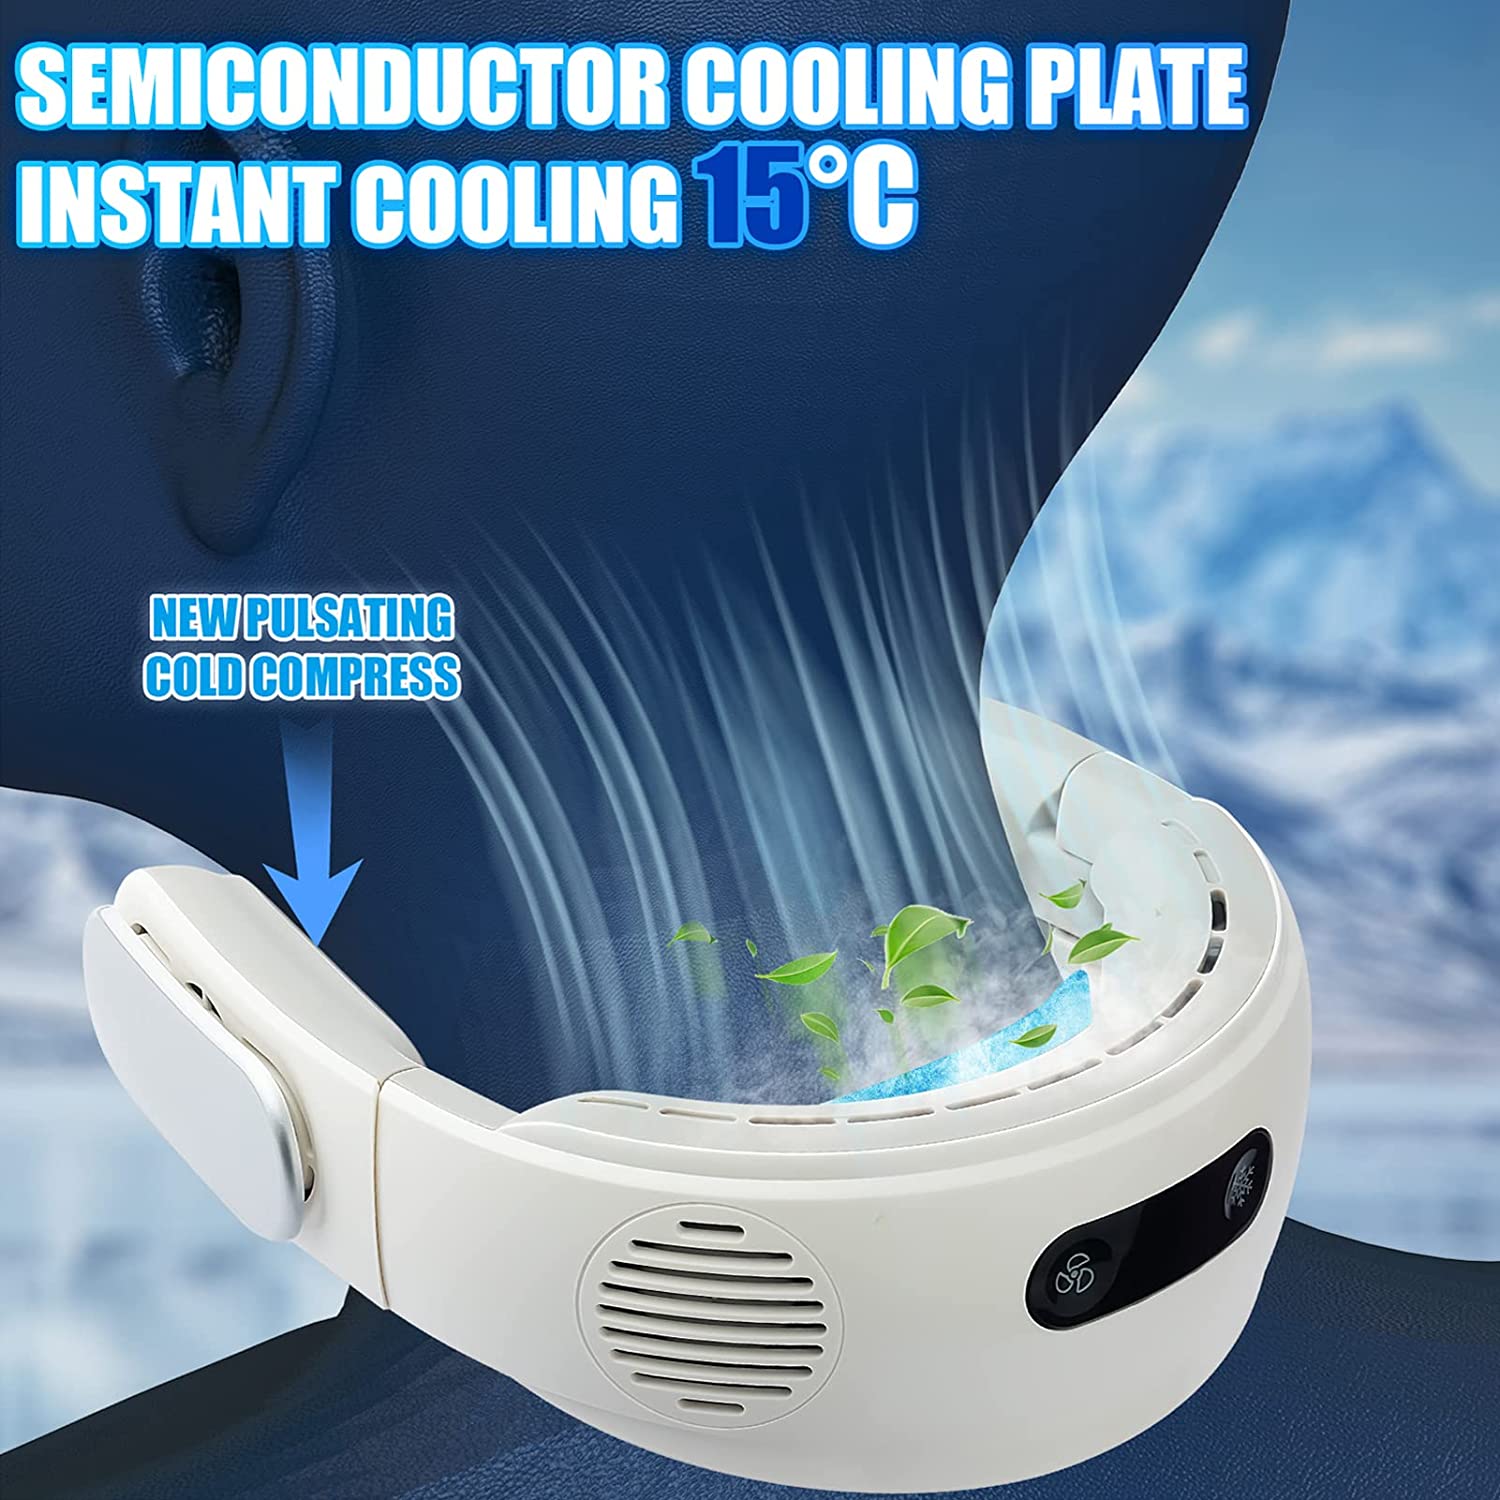 Cool Summer Portable Air Conditioning Senai Neck Fan, Neck Air Conditioning, Cooling Personal Fan, Cold Use/Foldable 5000mAh Battery-Powered, USB Fast Charging Wearable Fan, 3-Speed Adjustment Function